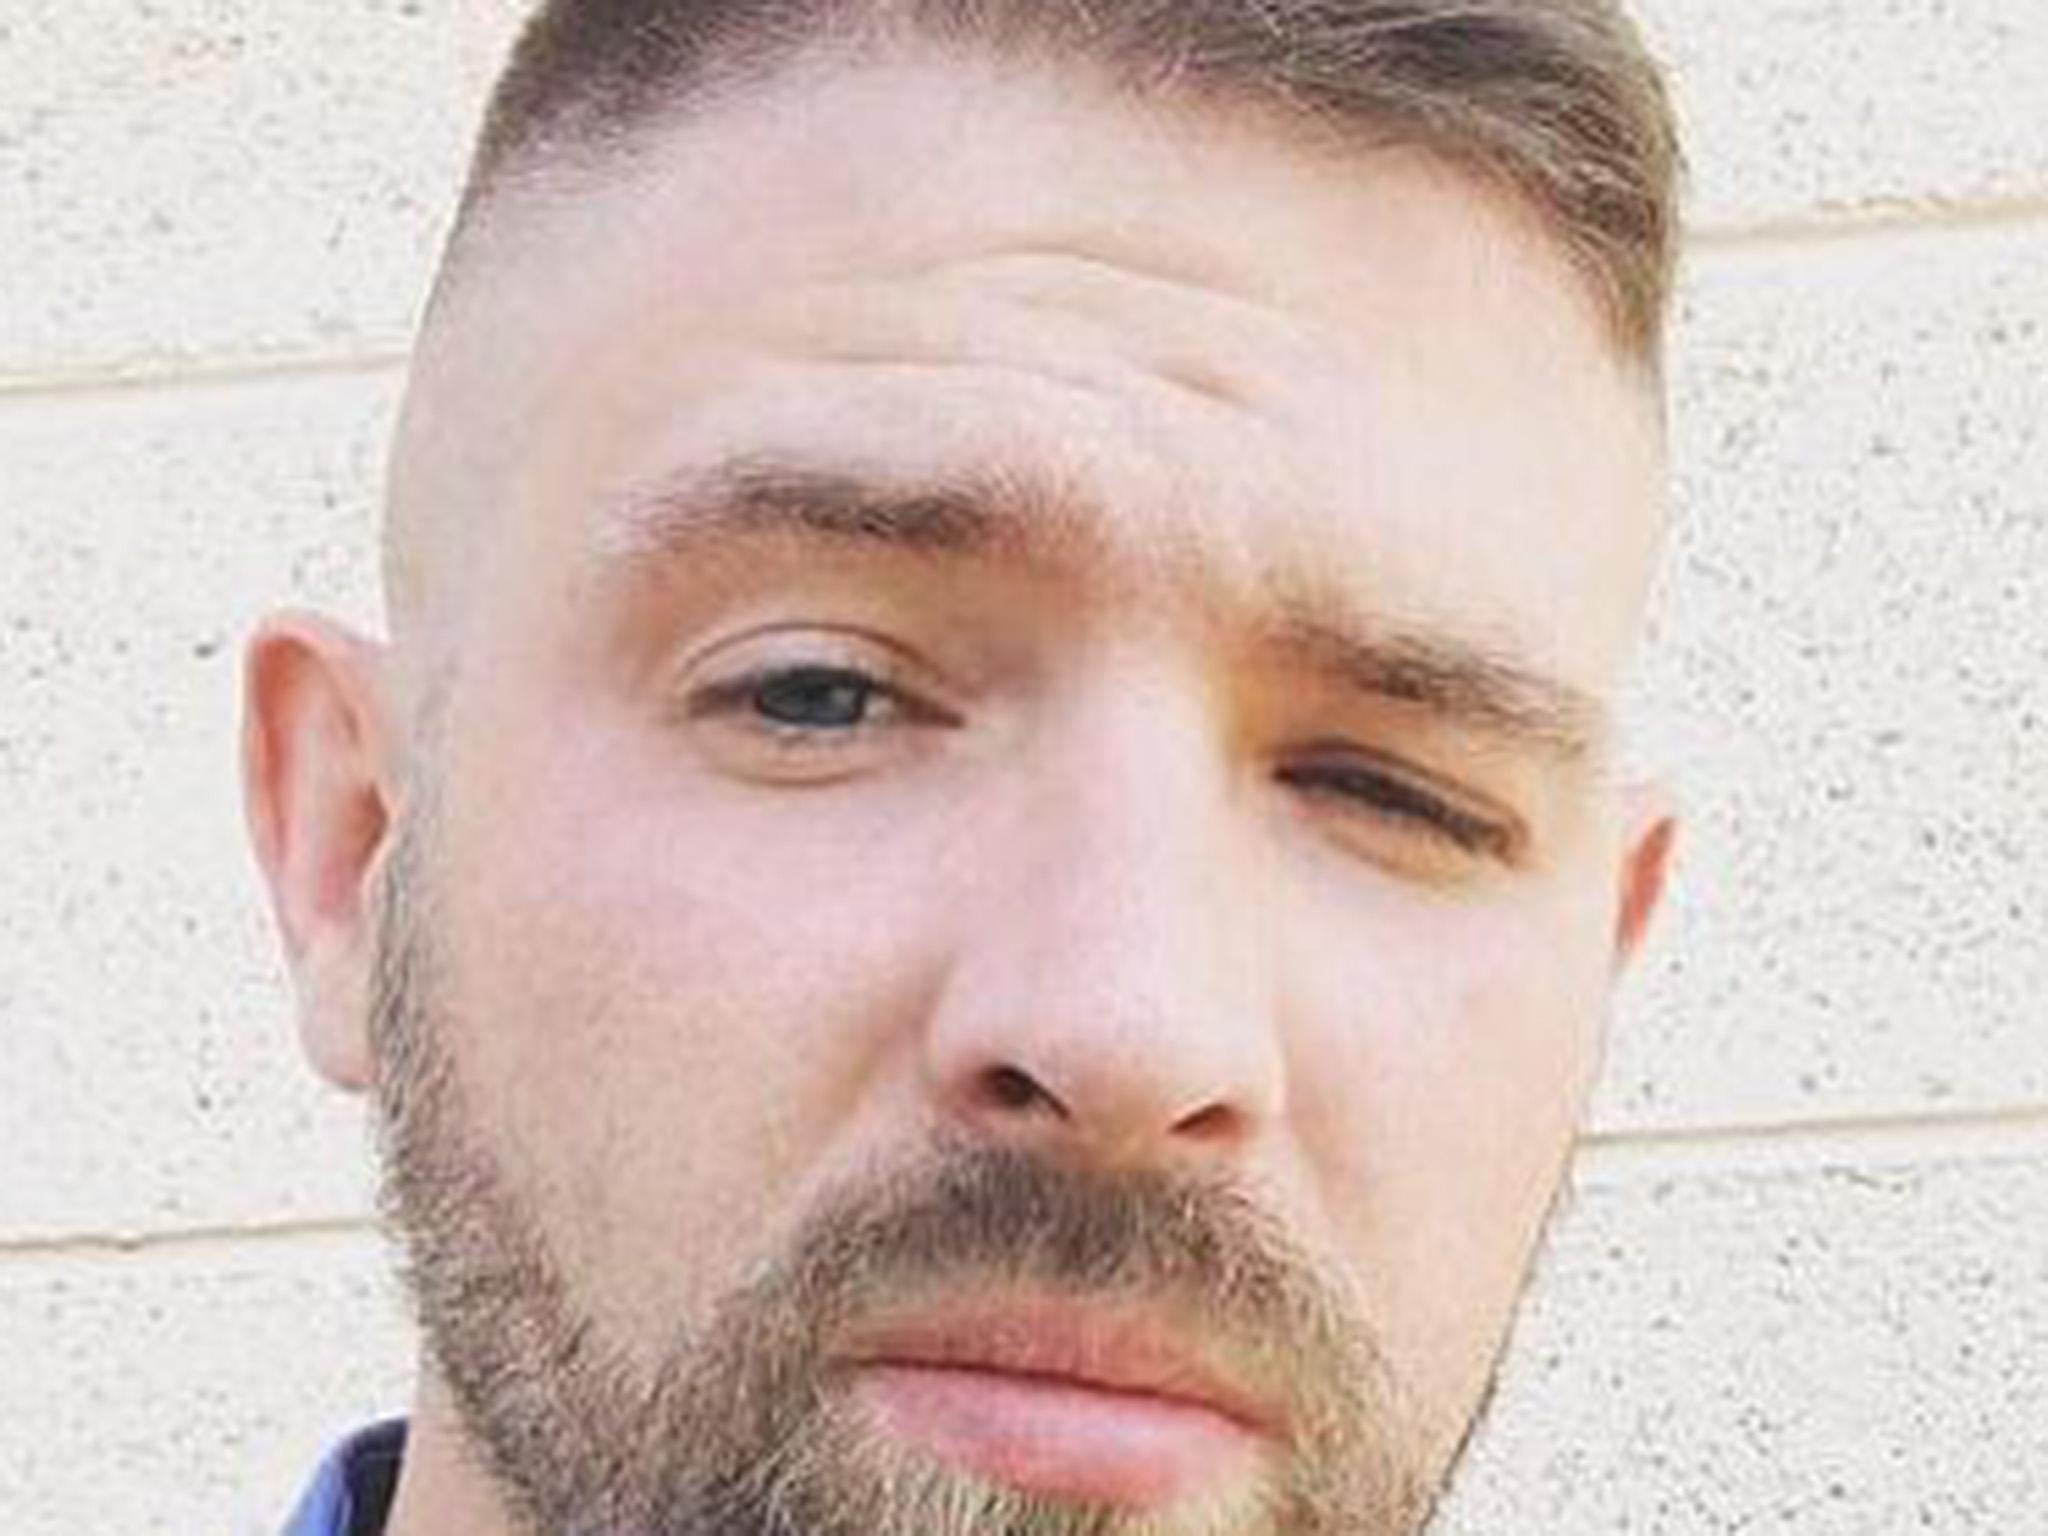 Man who claimed he was stabbed by anti-fascist because of his 'neo-Nazi'  haircut arrested for filing false report | The Independent | The Independent